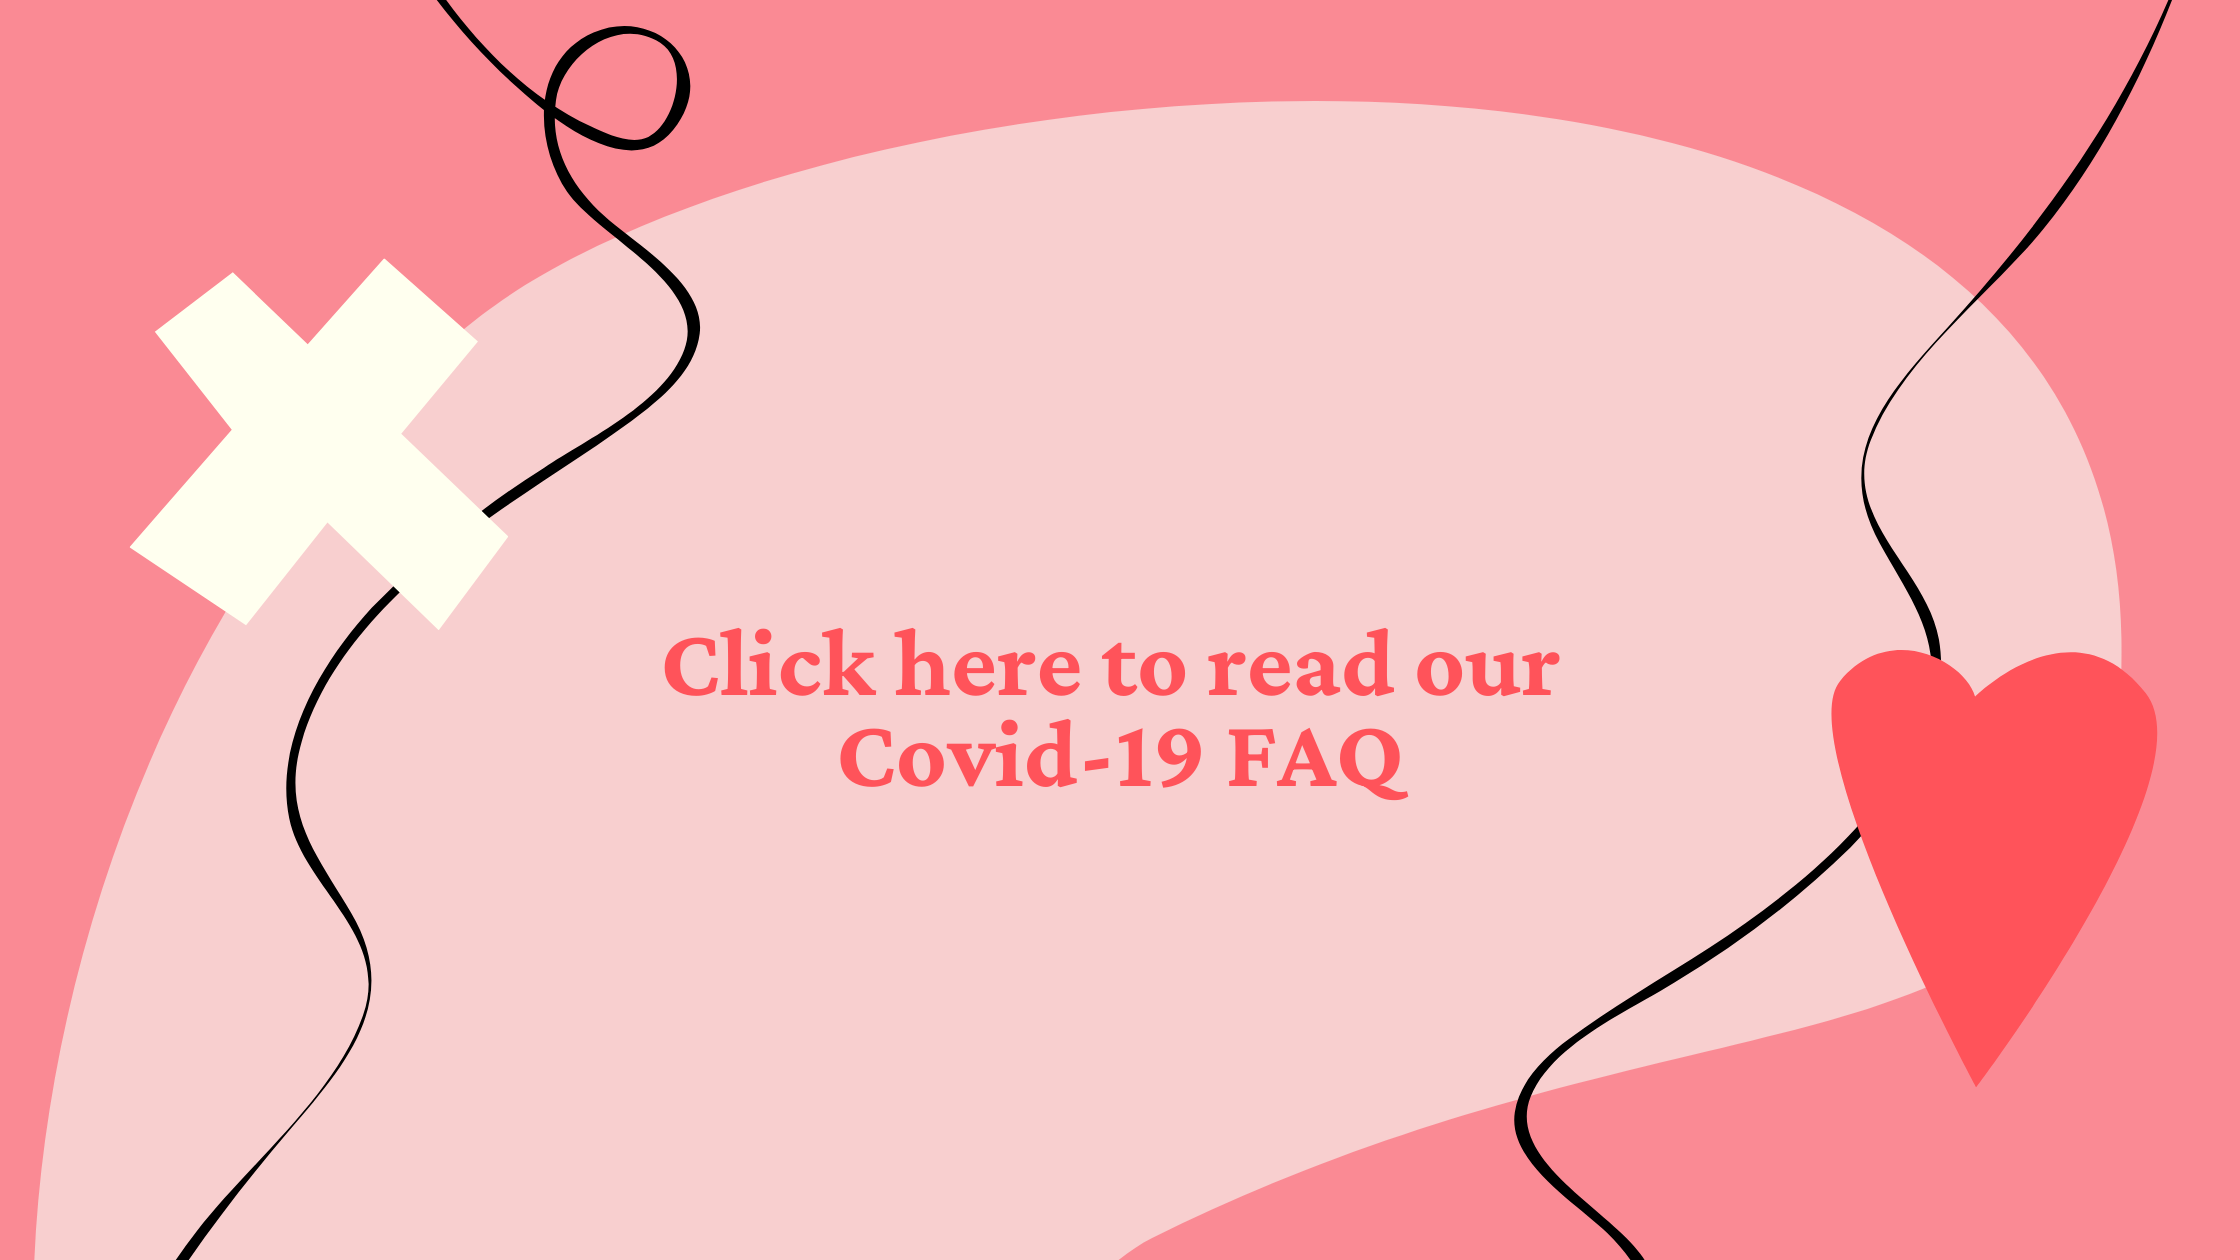 Click here to read our Covid-19 FAQ